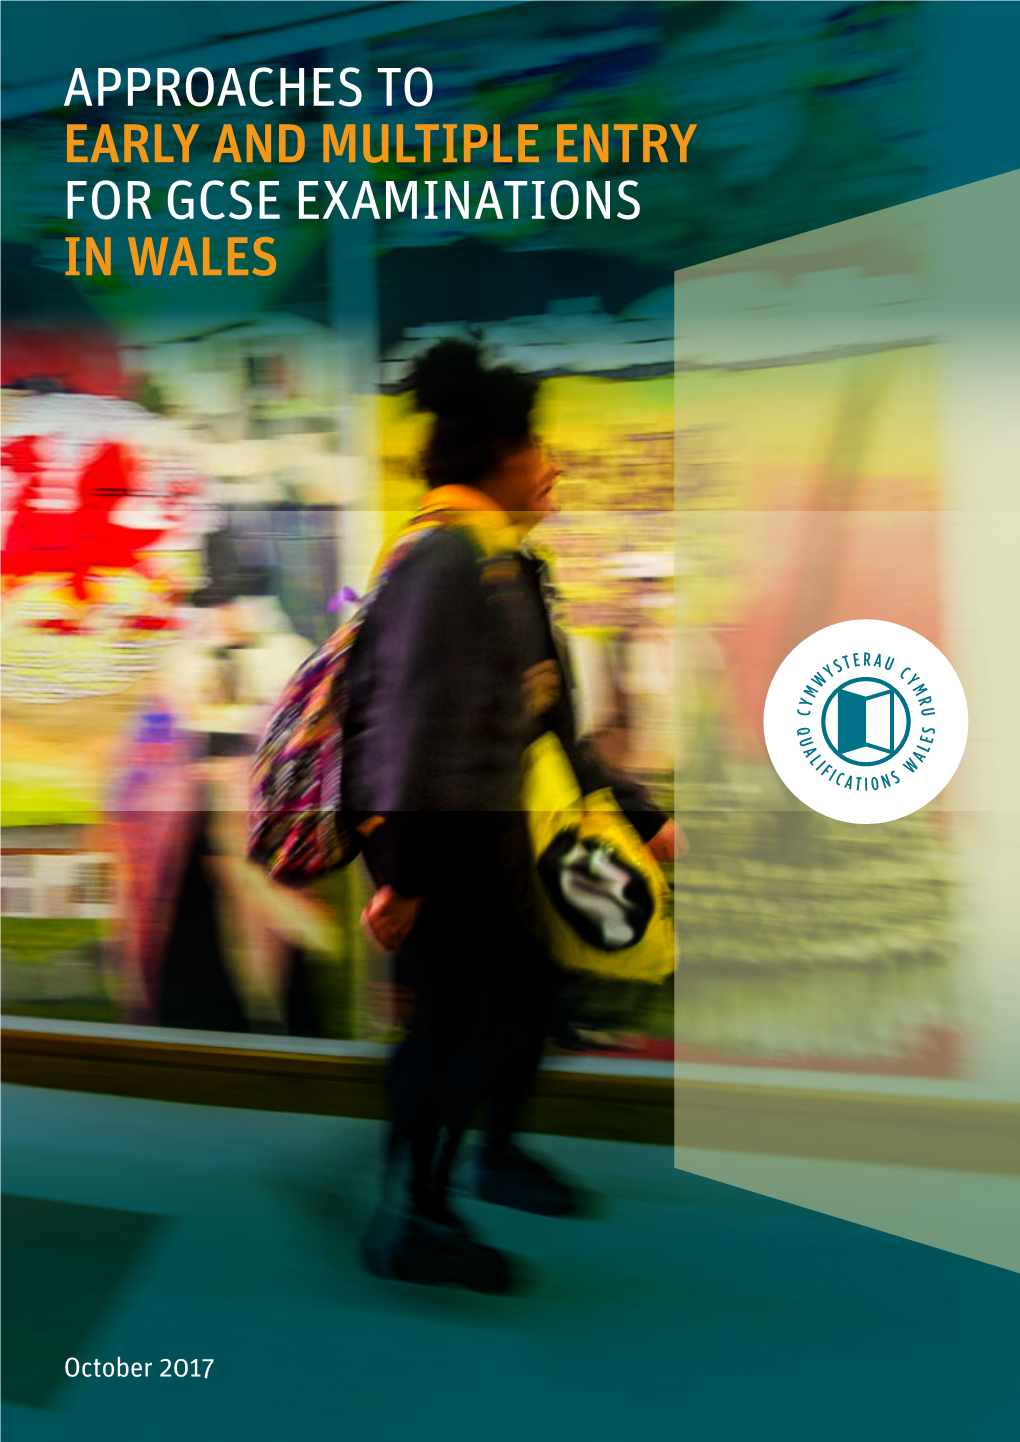 Report on Early and Multiple Entry for GCSE in Wales